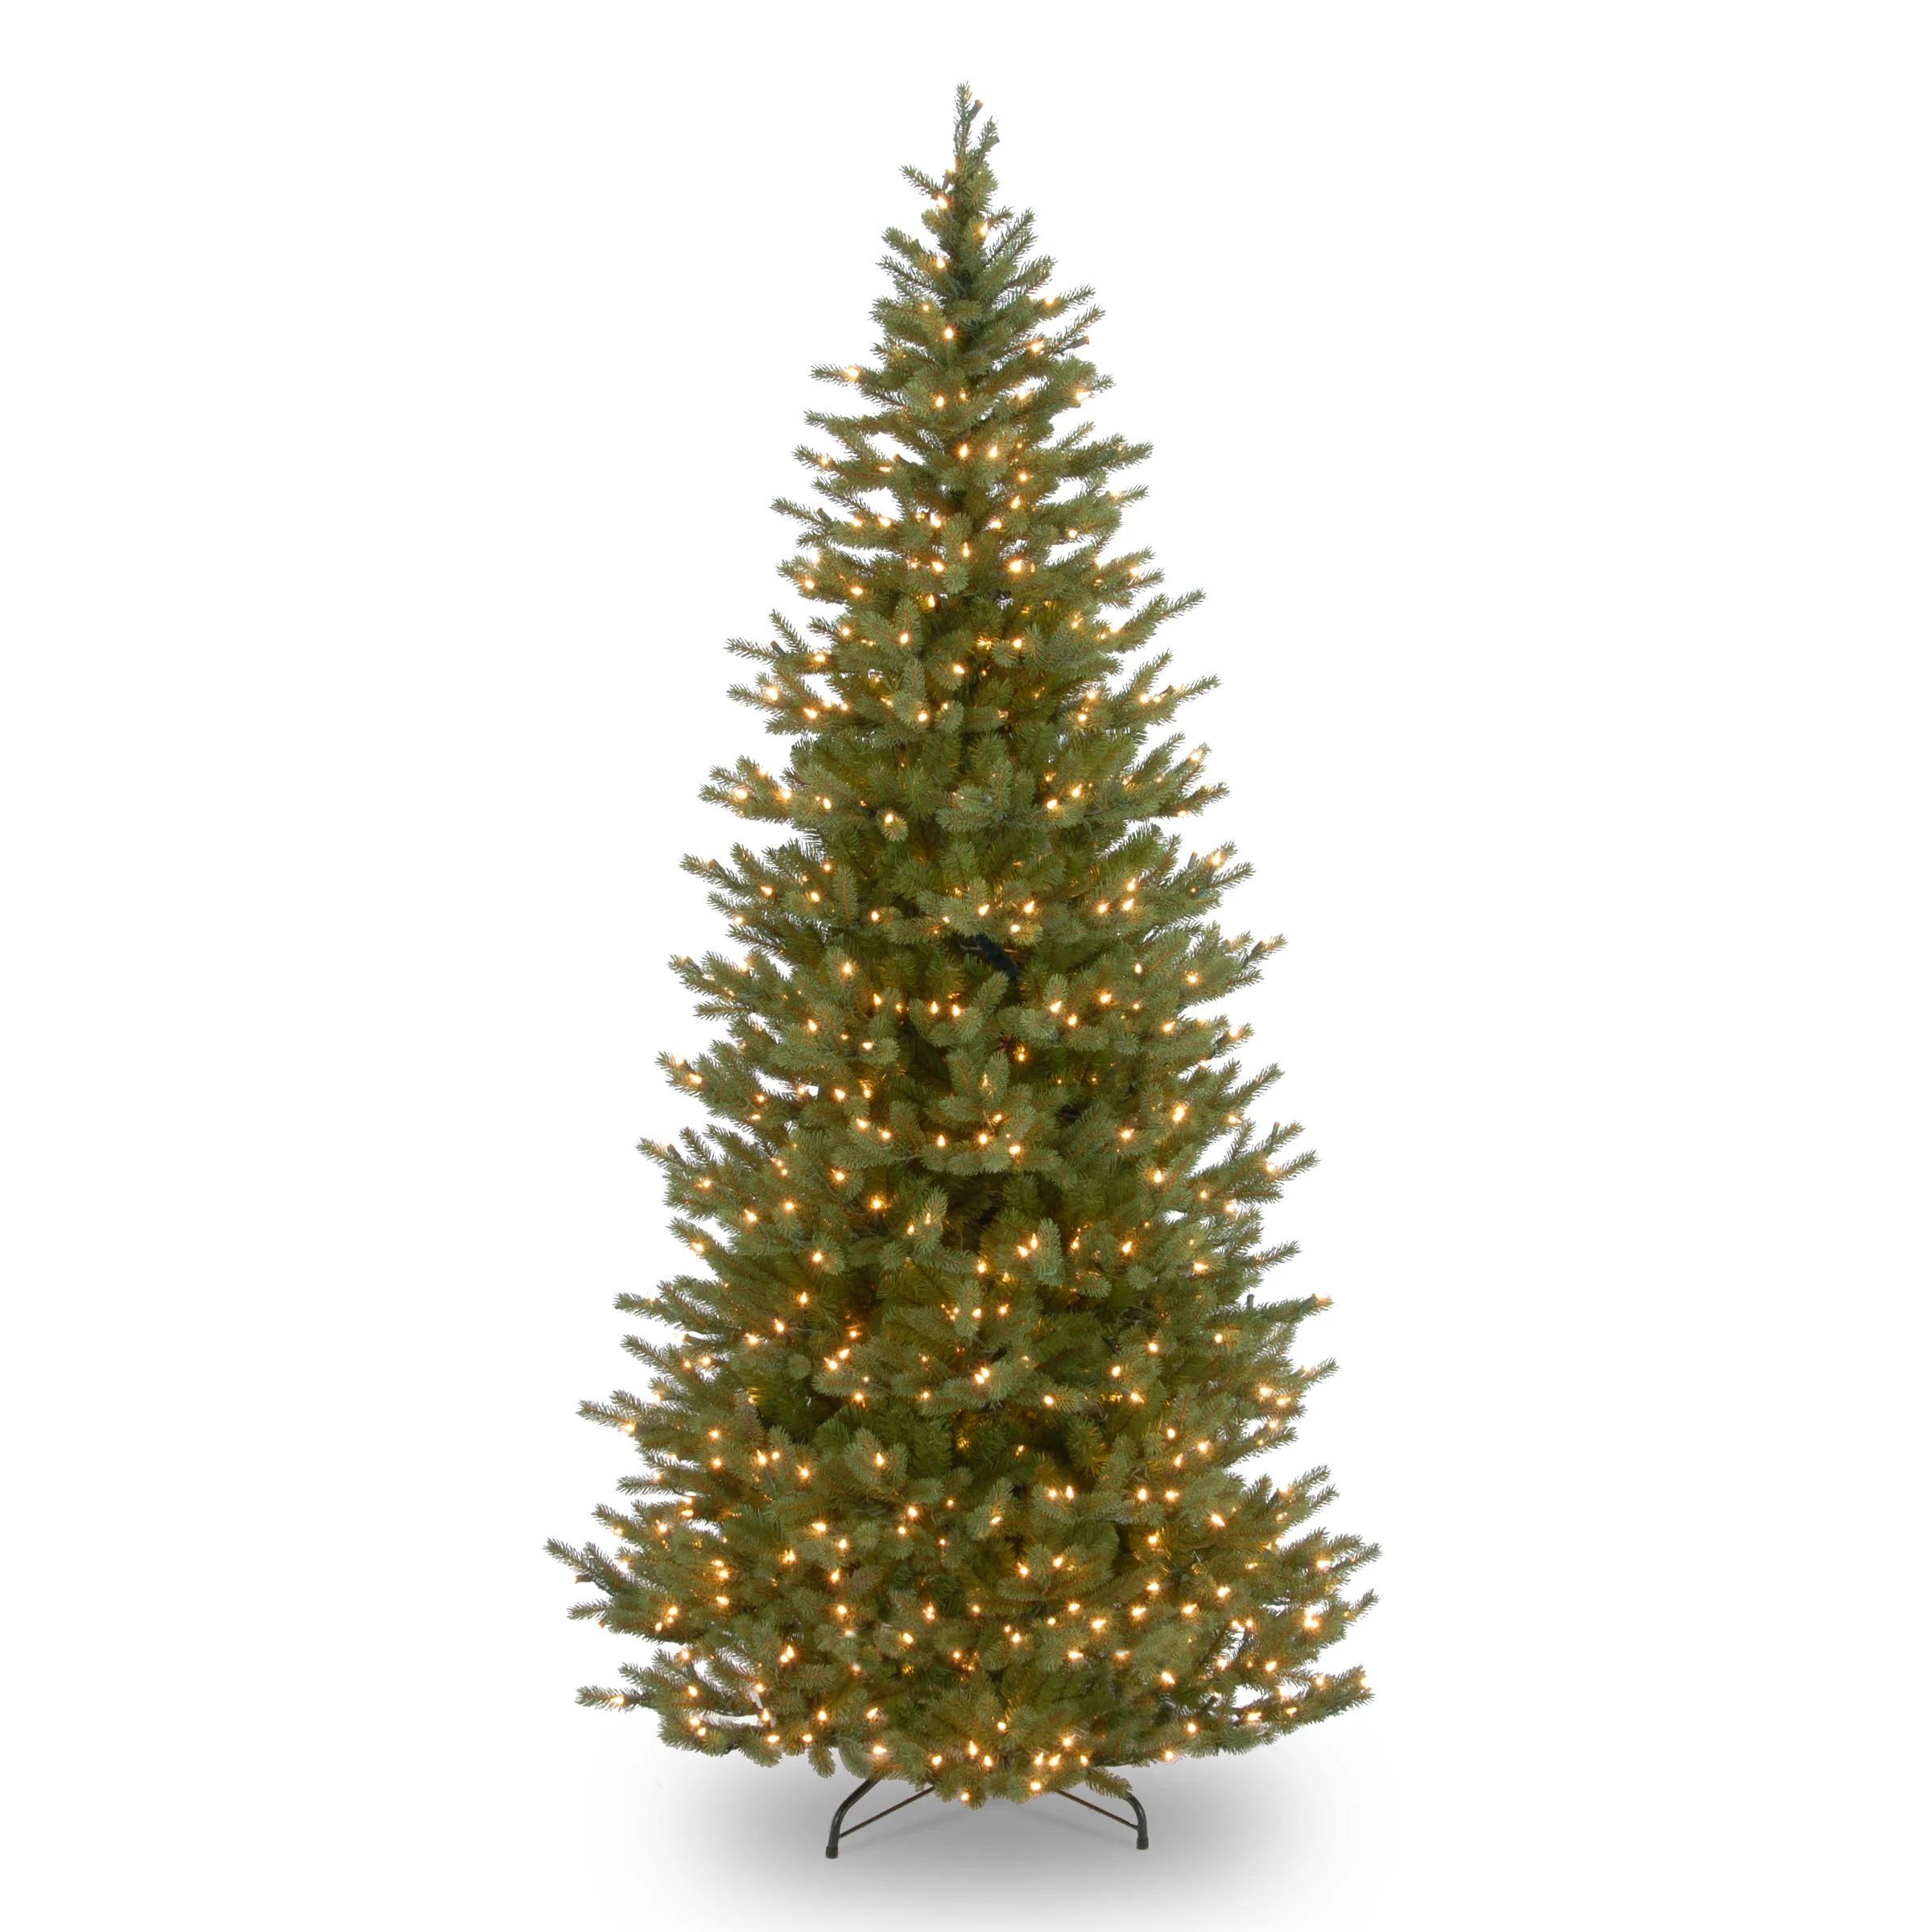 Feel Real Slim 7.5' Green Spruce Christmas Tree with 700 Clear/White Lights | Wayfair Professional